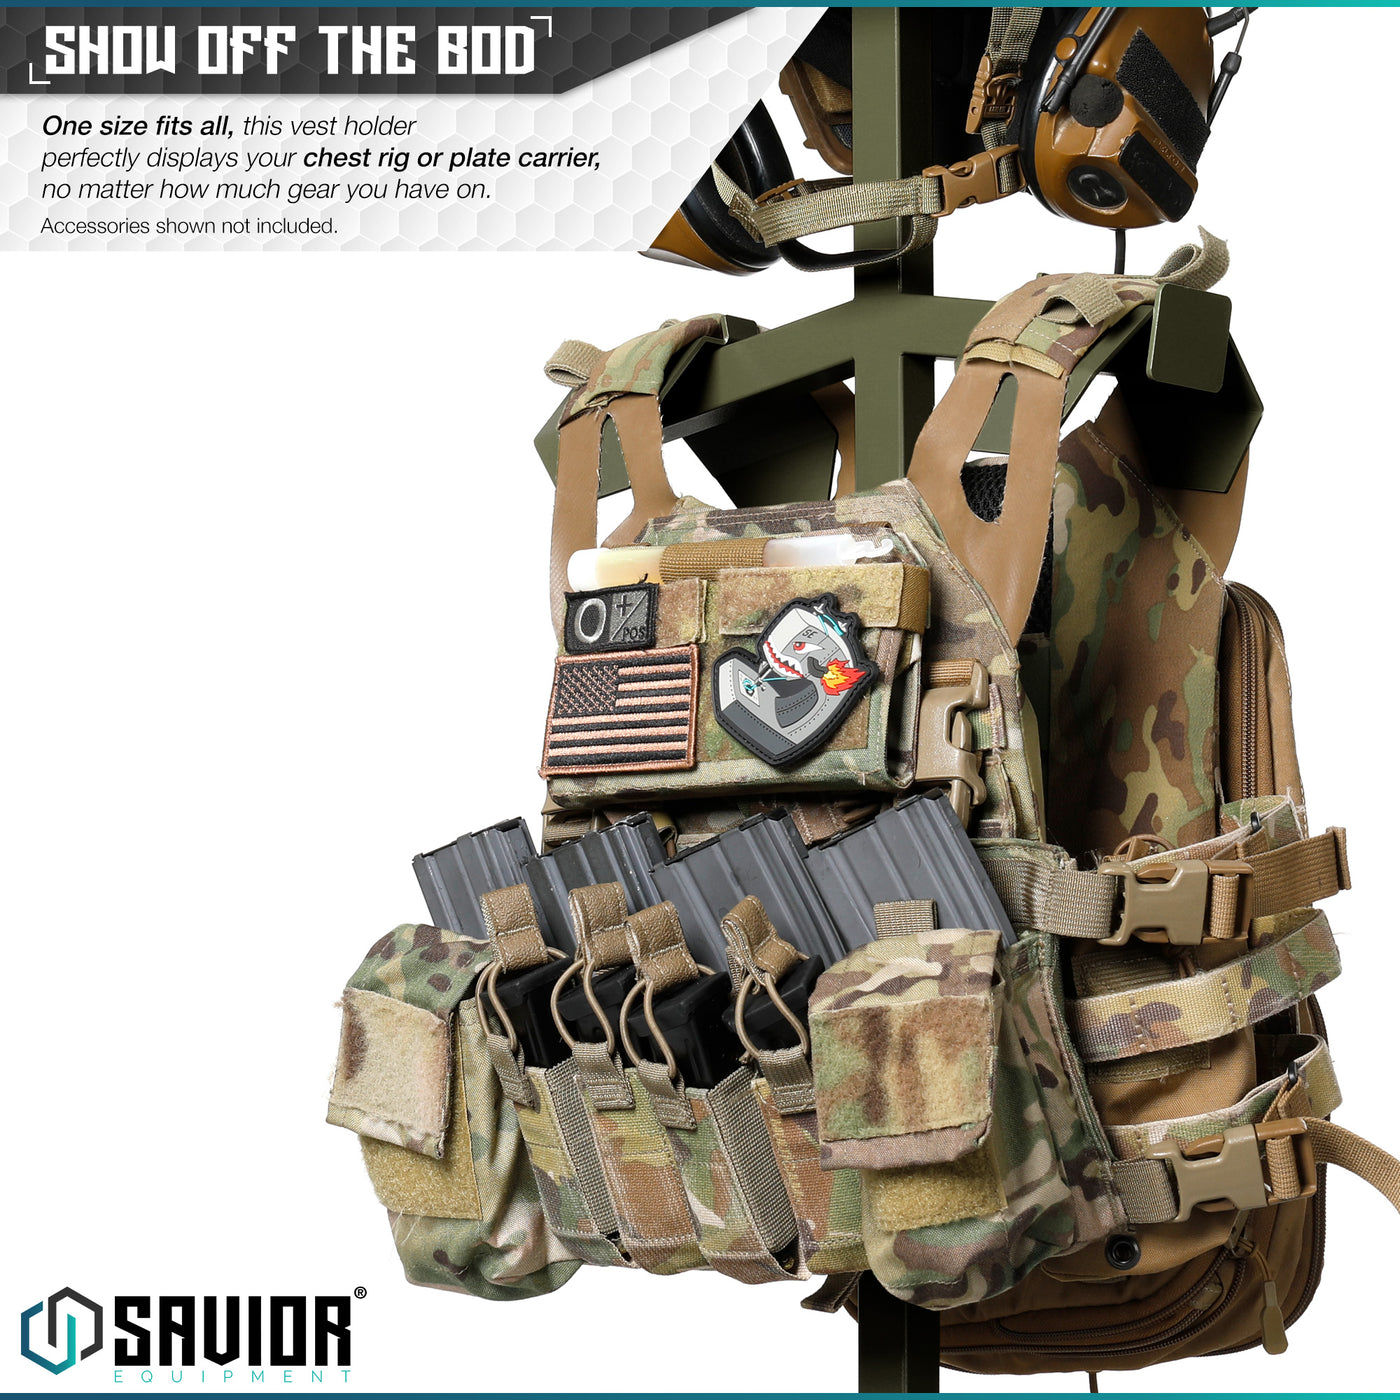 Show off the bod - One size fits all, this vest holder perfectly displays your chest rig or plate carrier, no matter how much gear you have on.